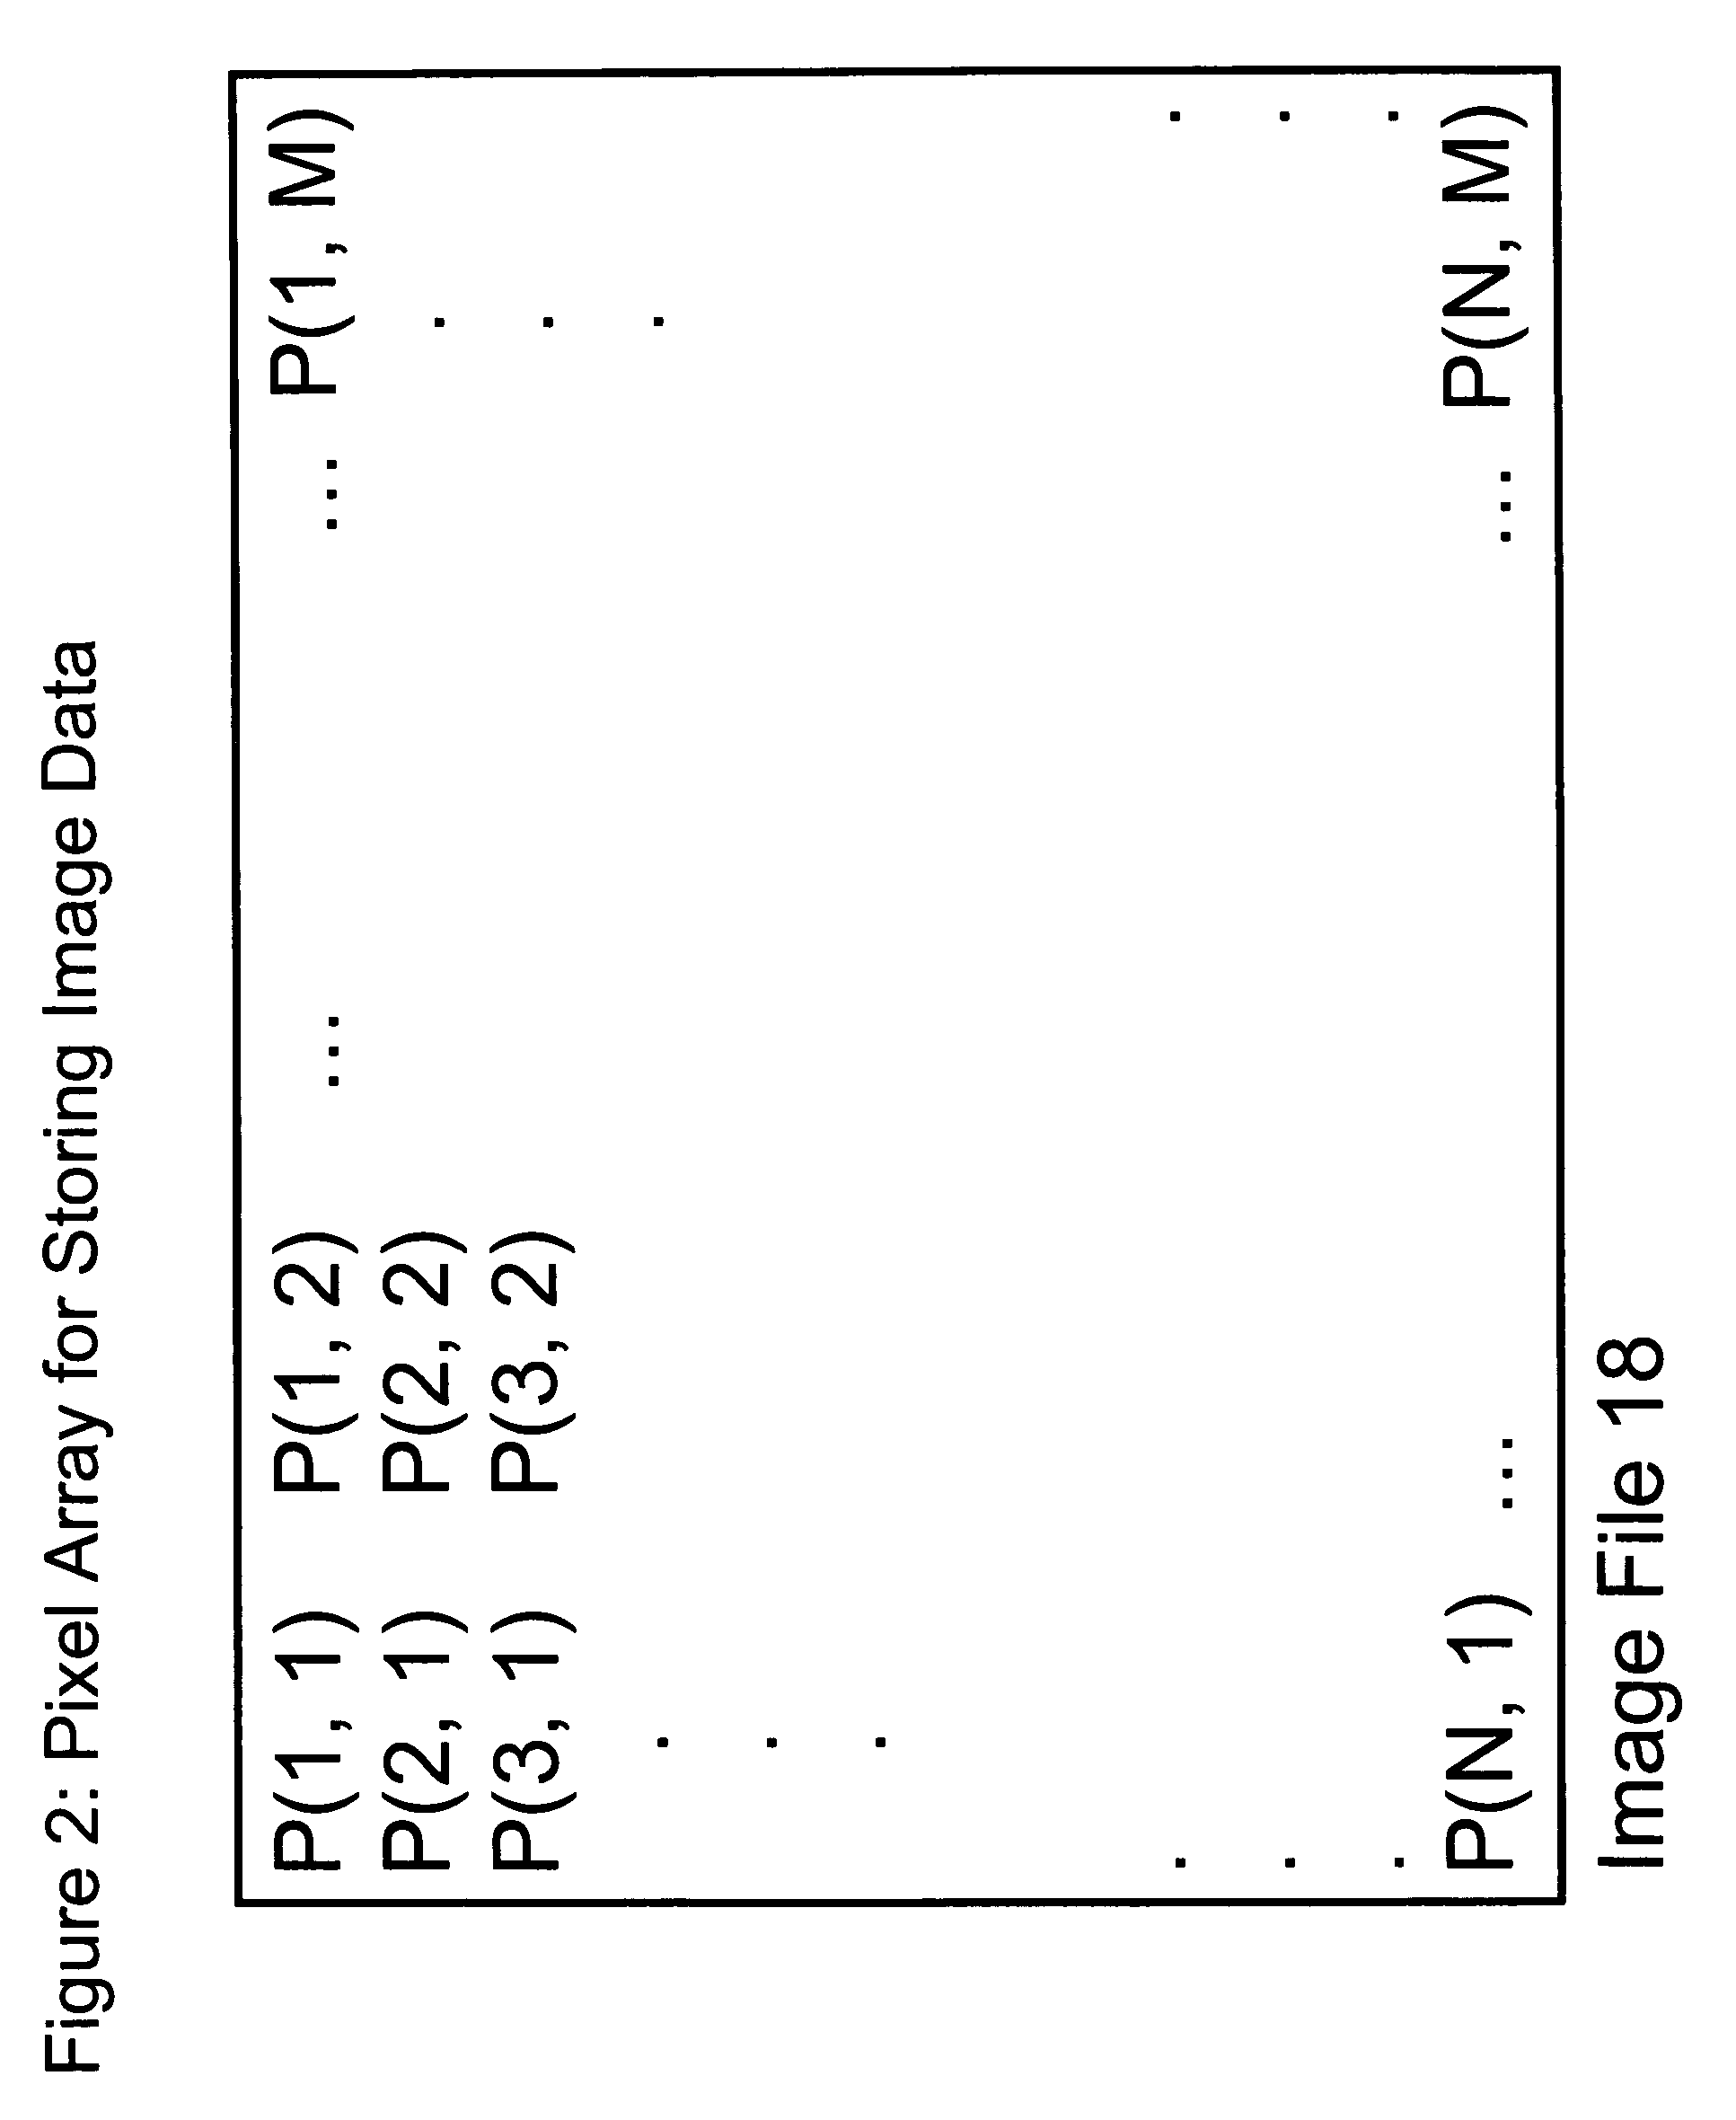 Method and system for identifying illumination flux in an image